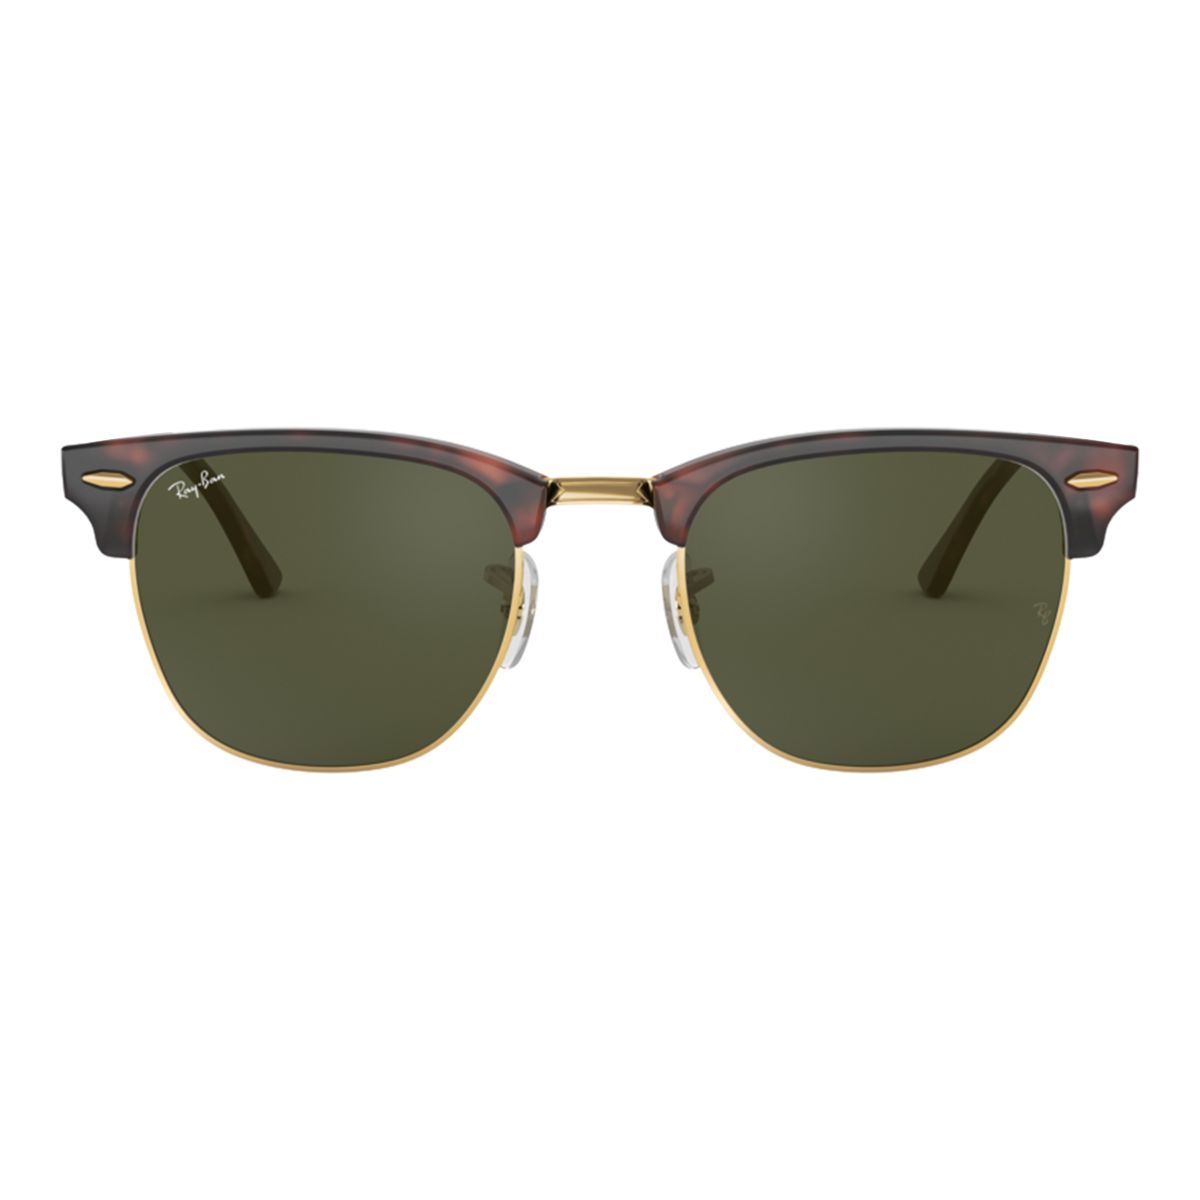 Image of Ray Ban Men's/Women's Clubmaster Browline Sunglasses